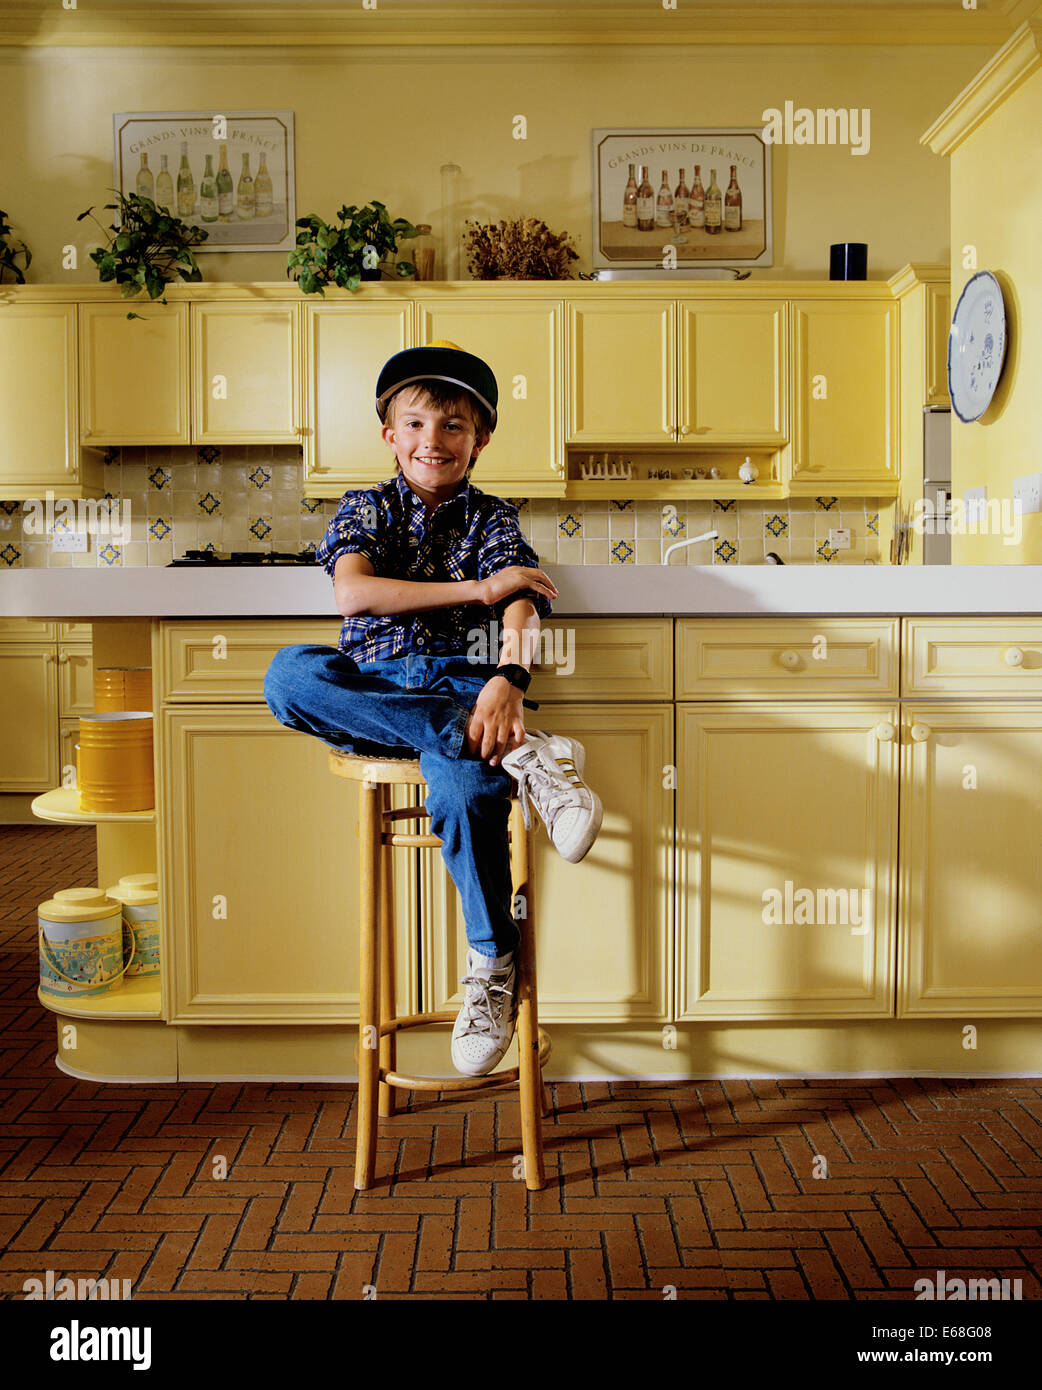 Young boy sitting in modern kitchen Stock Photo